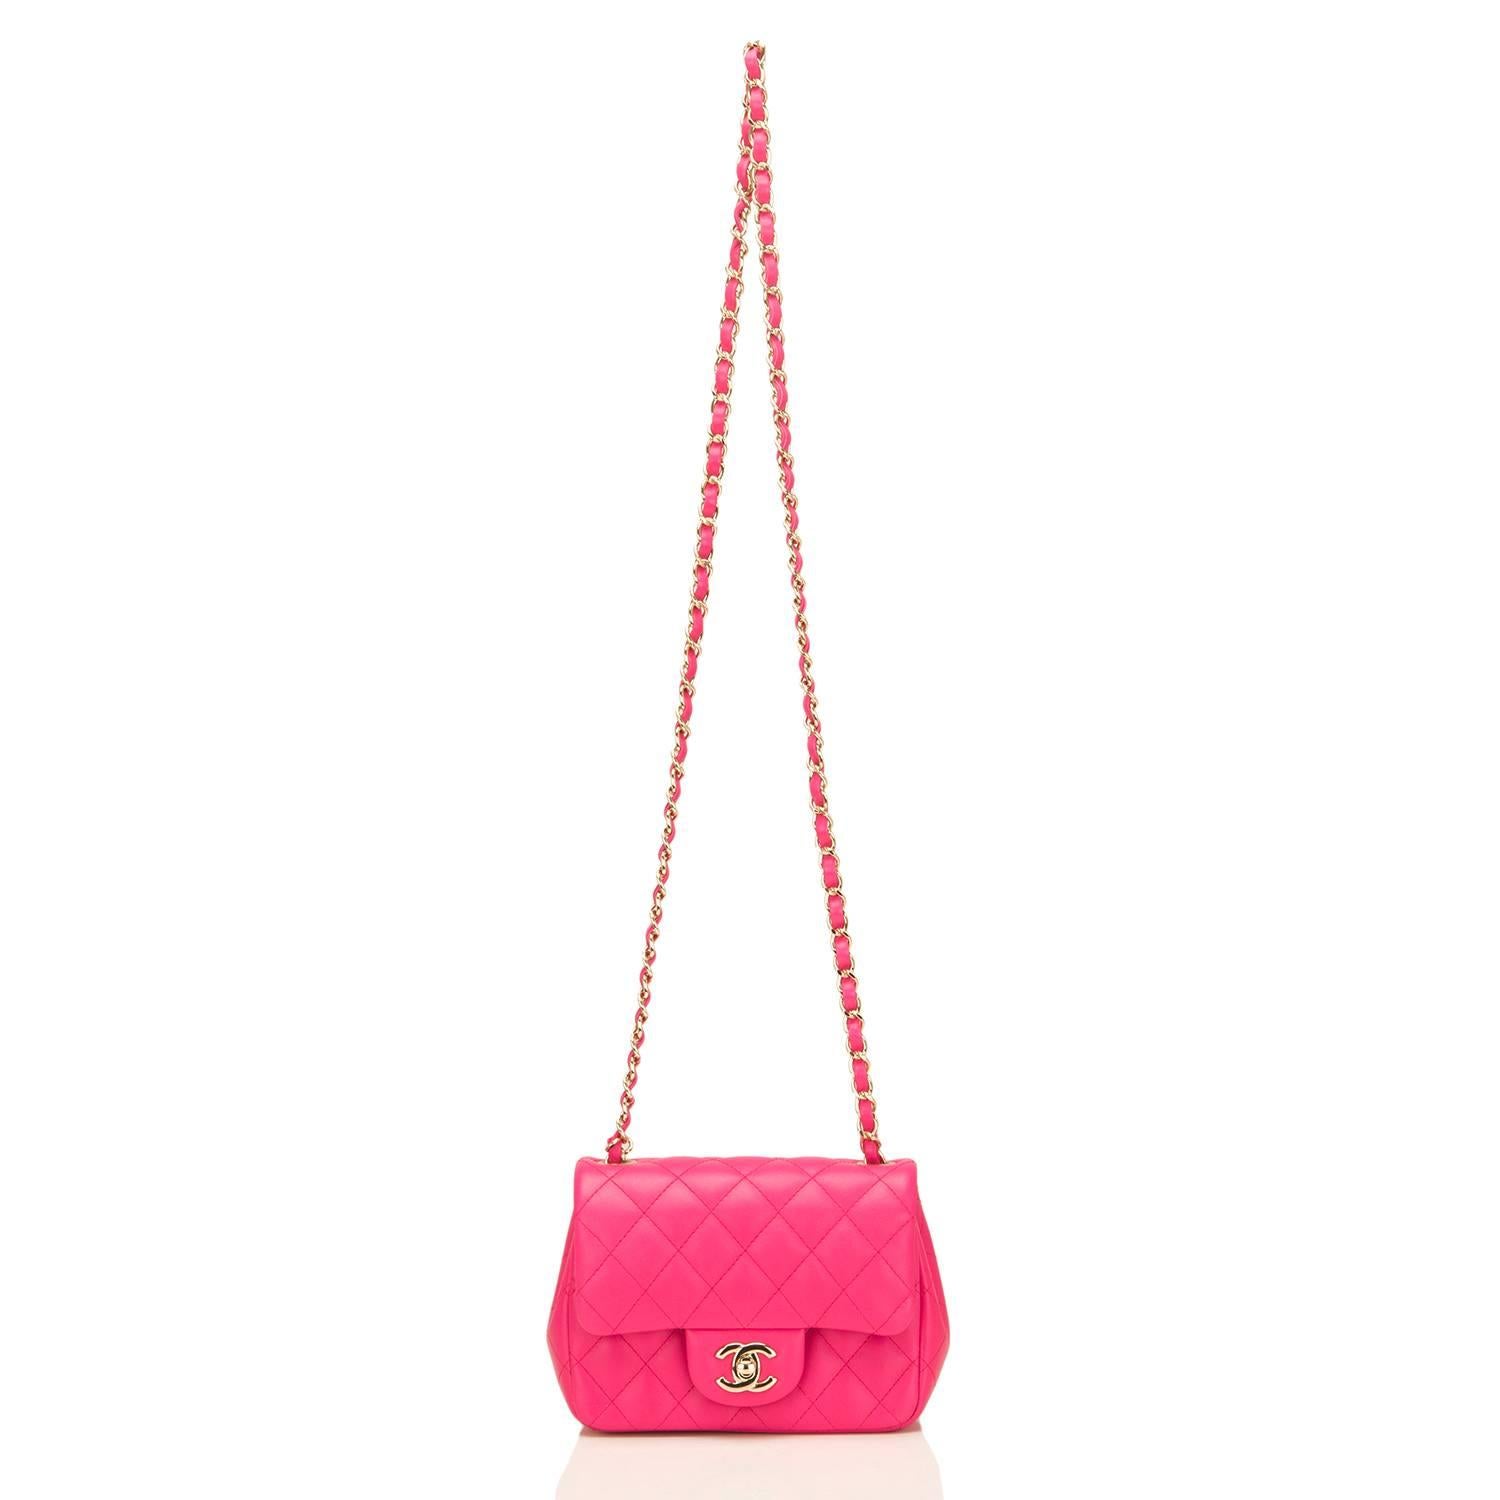 Chanel Fuchsia Quilted Lambskin Square Mini Flap Bag 1